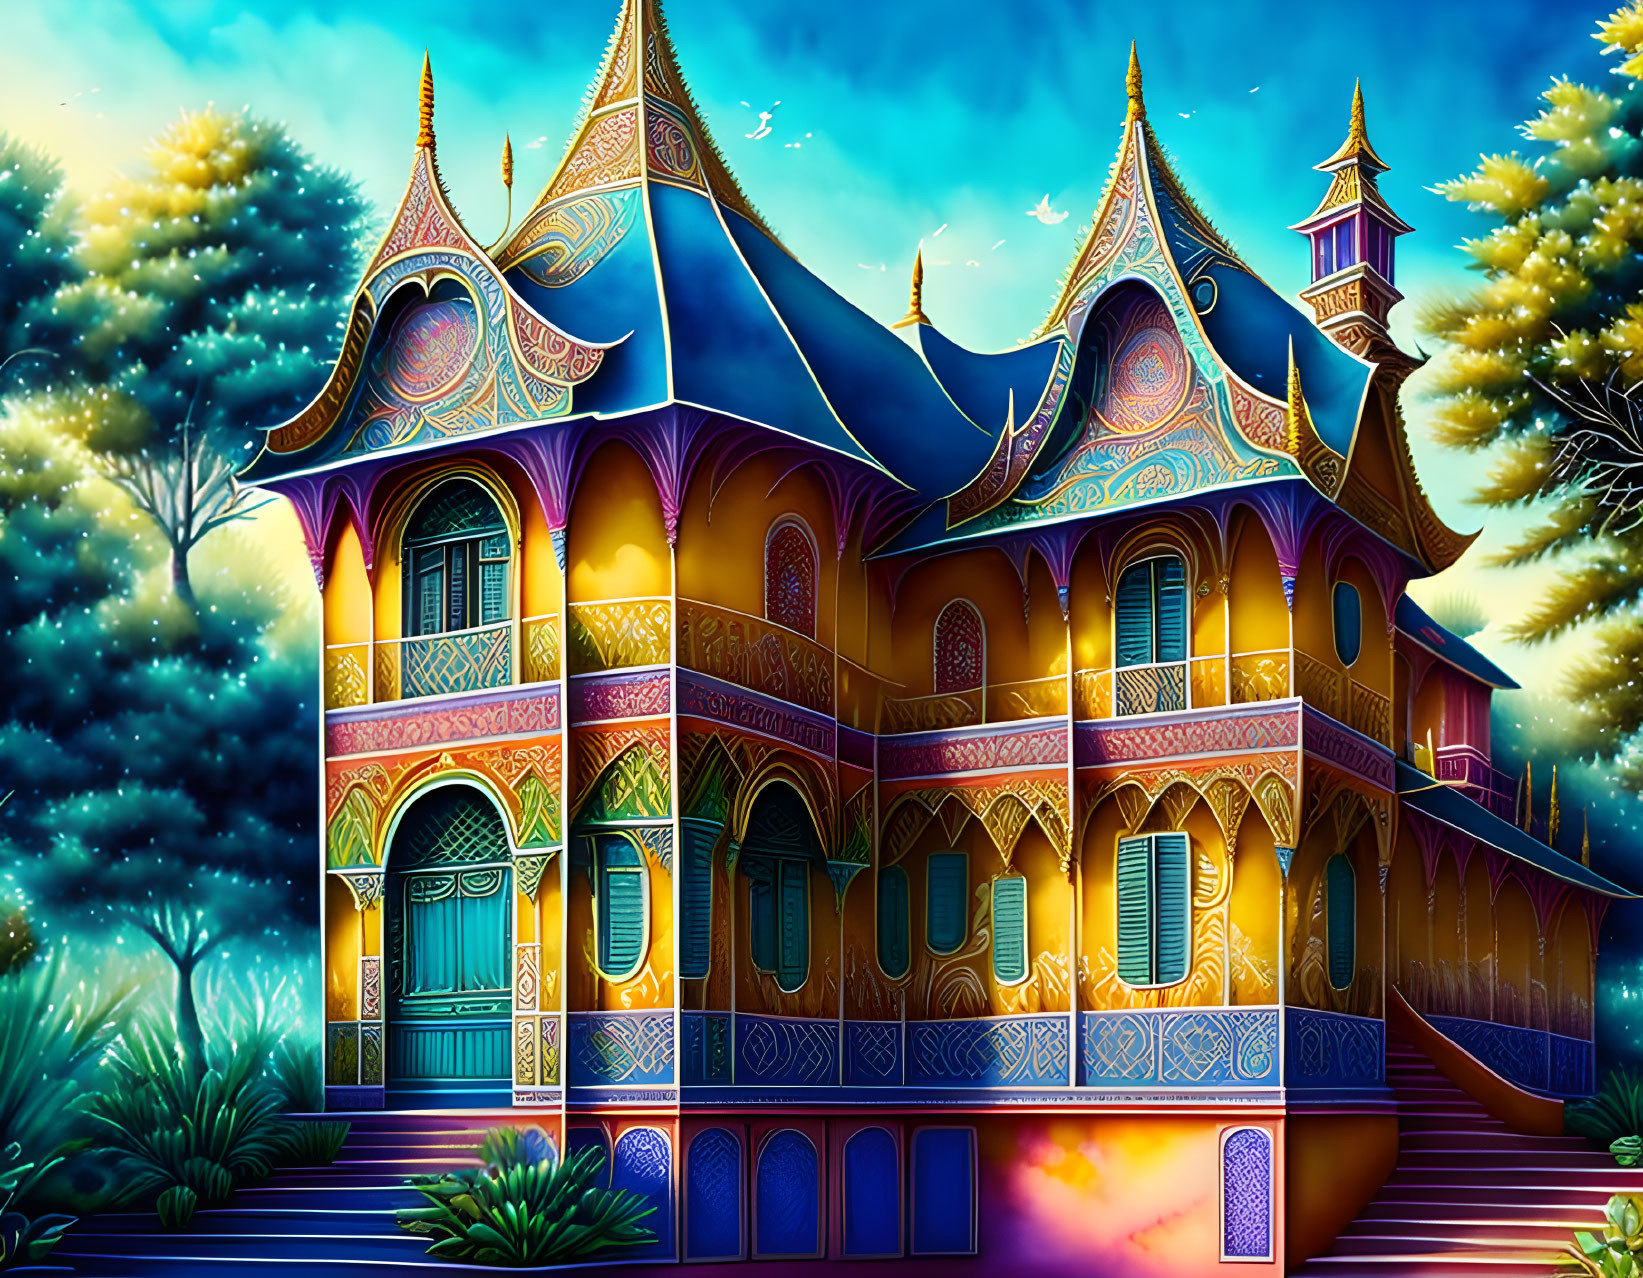 Colorful Fantasy House with Pointed Roofs in Twilight Sky